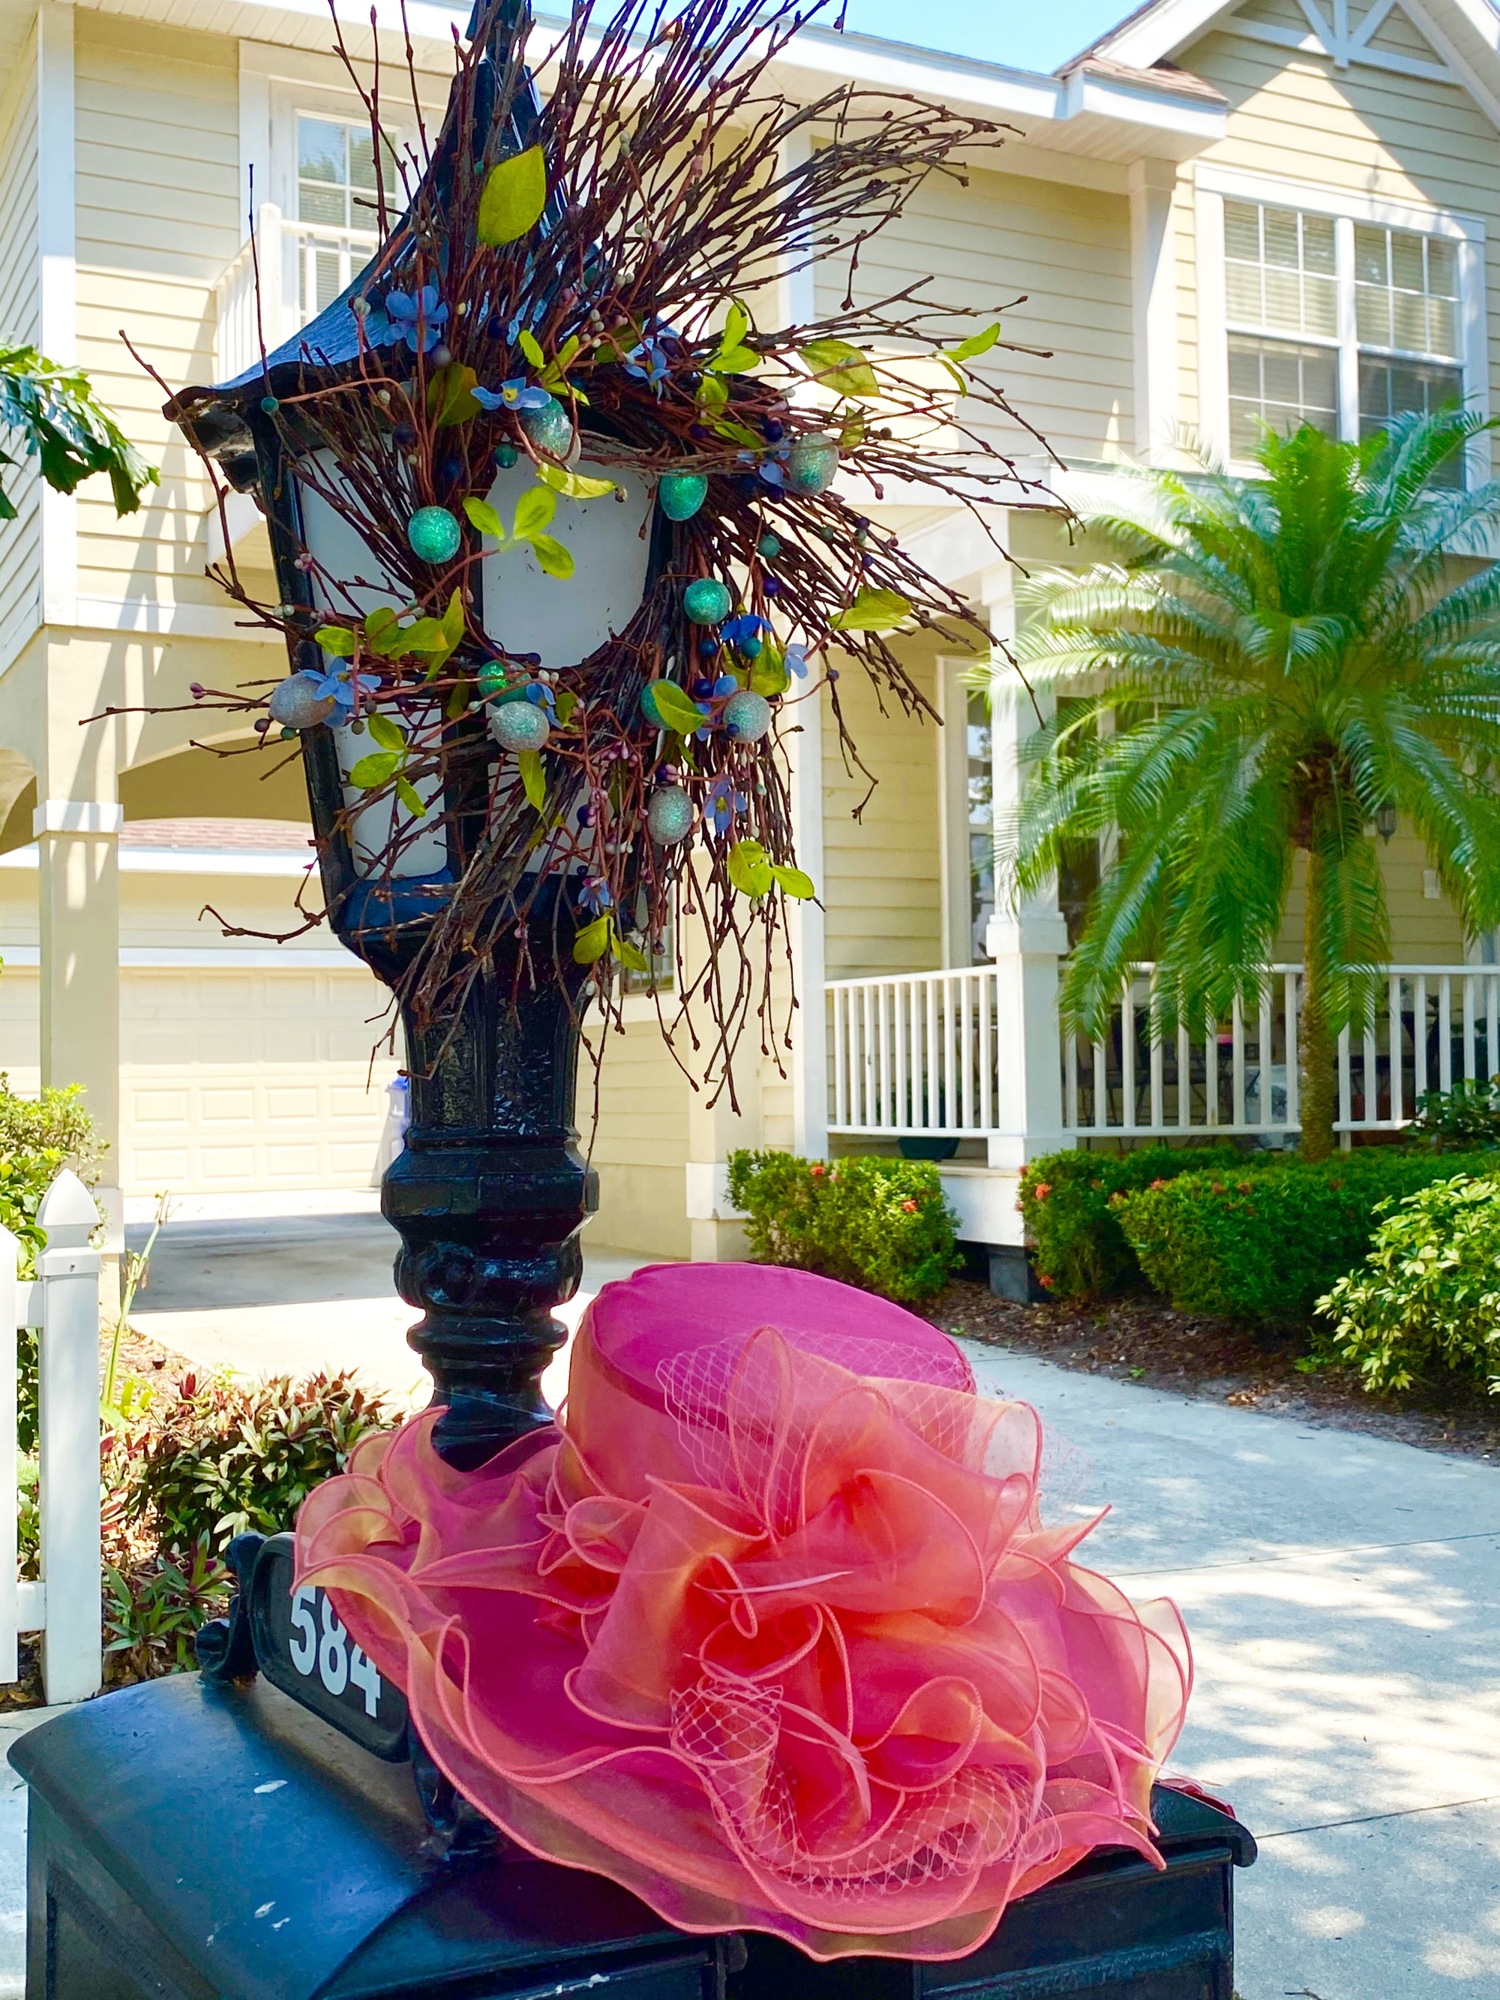 Deb Holton-Smith decorated her mailbox with a pink bonnet and an egg-filled wreath. Photo courtesy Deb Holton-Smith.